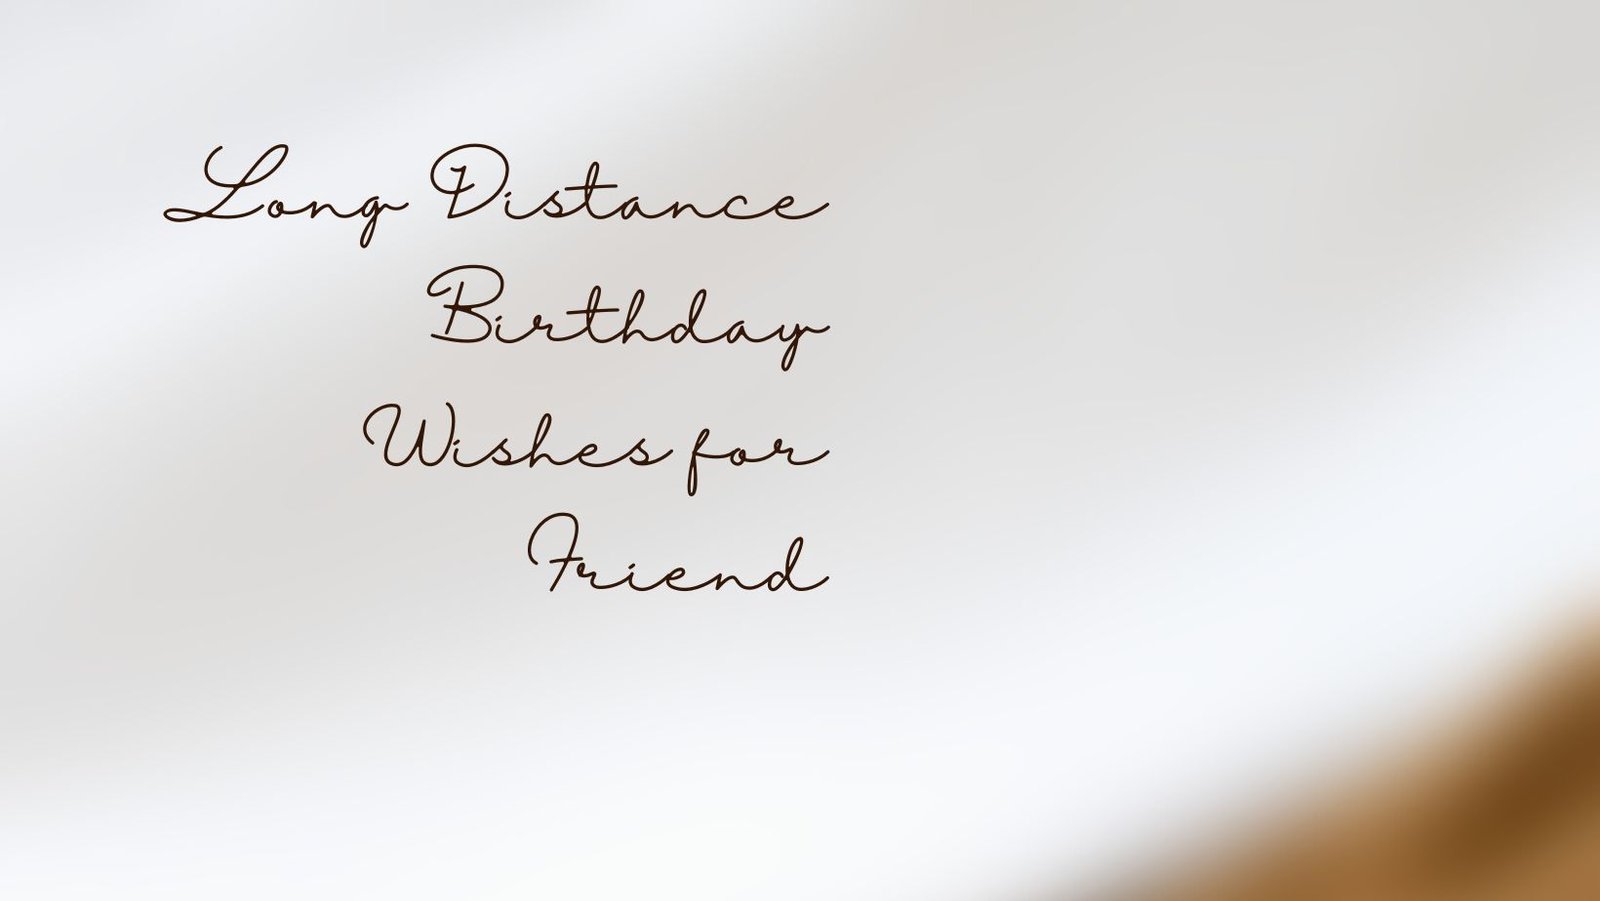 Long Distance Birthday Wishes for Friend